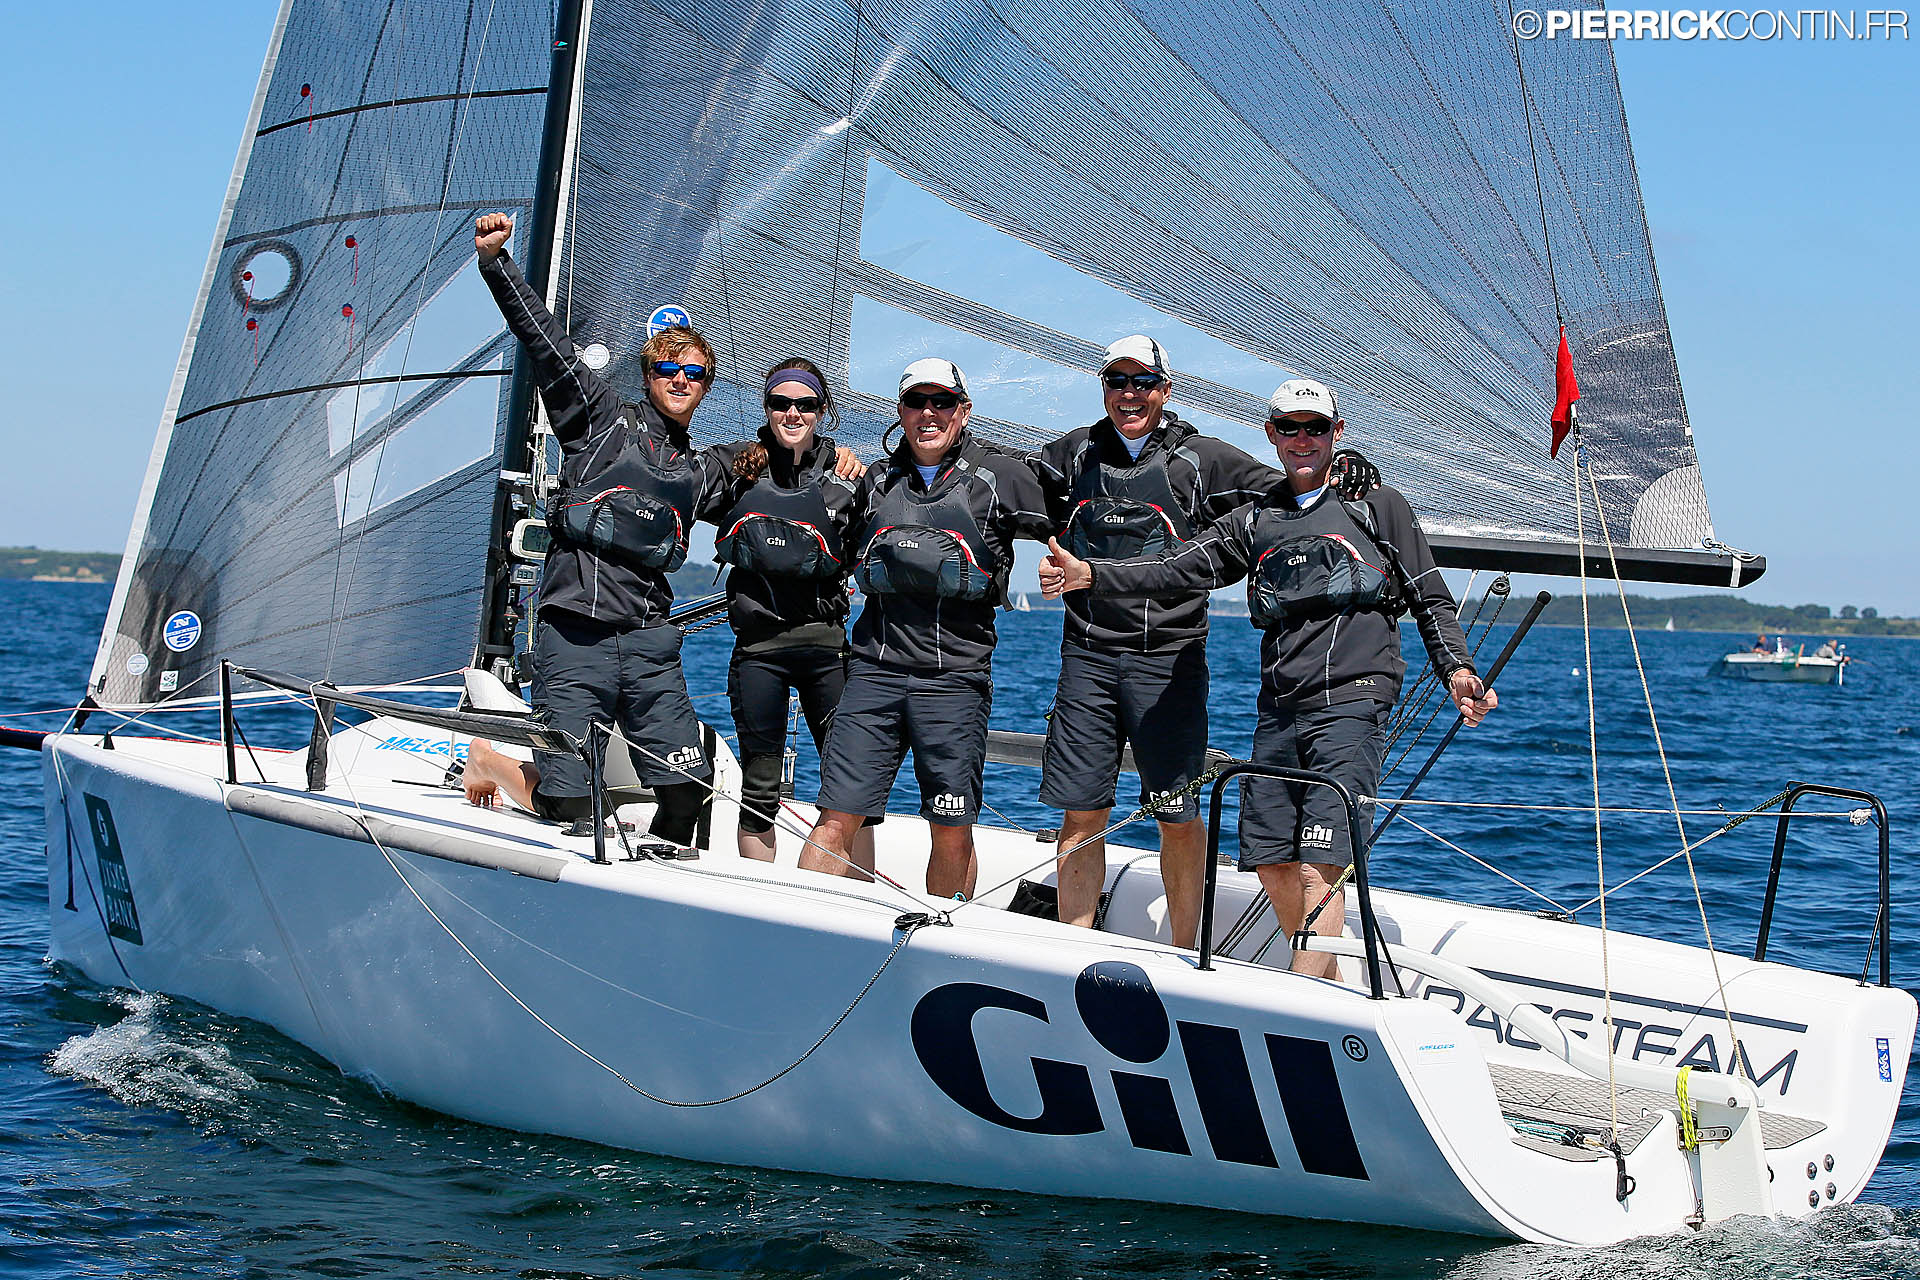 Miles Quinton's Gill Race Team GBR694 with Geoffry Carveth in helm - photo Pierr